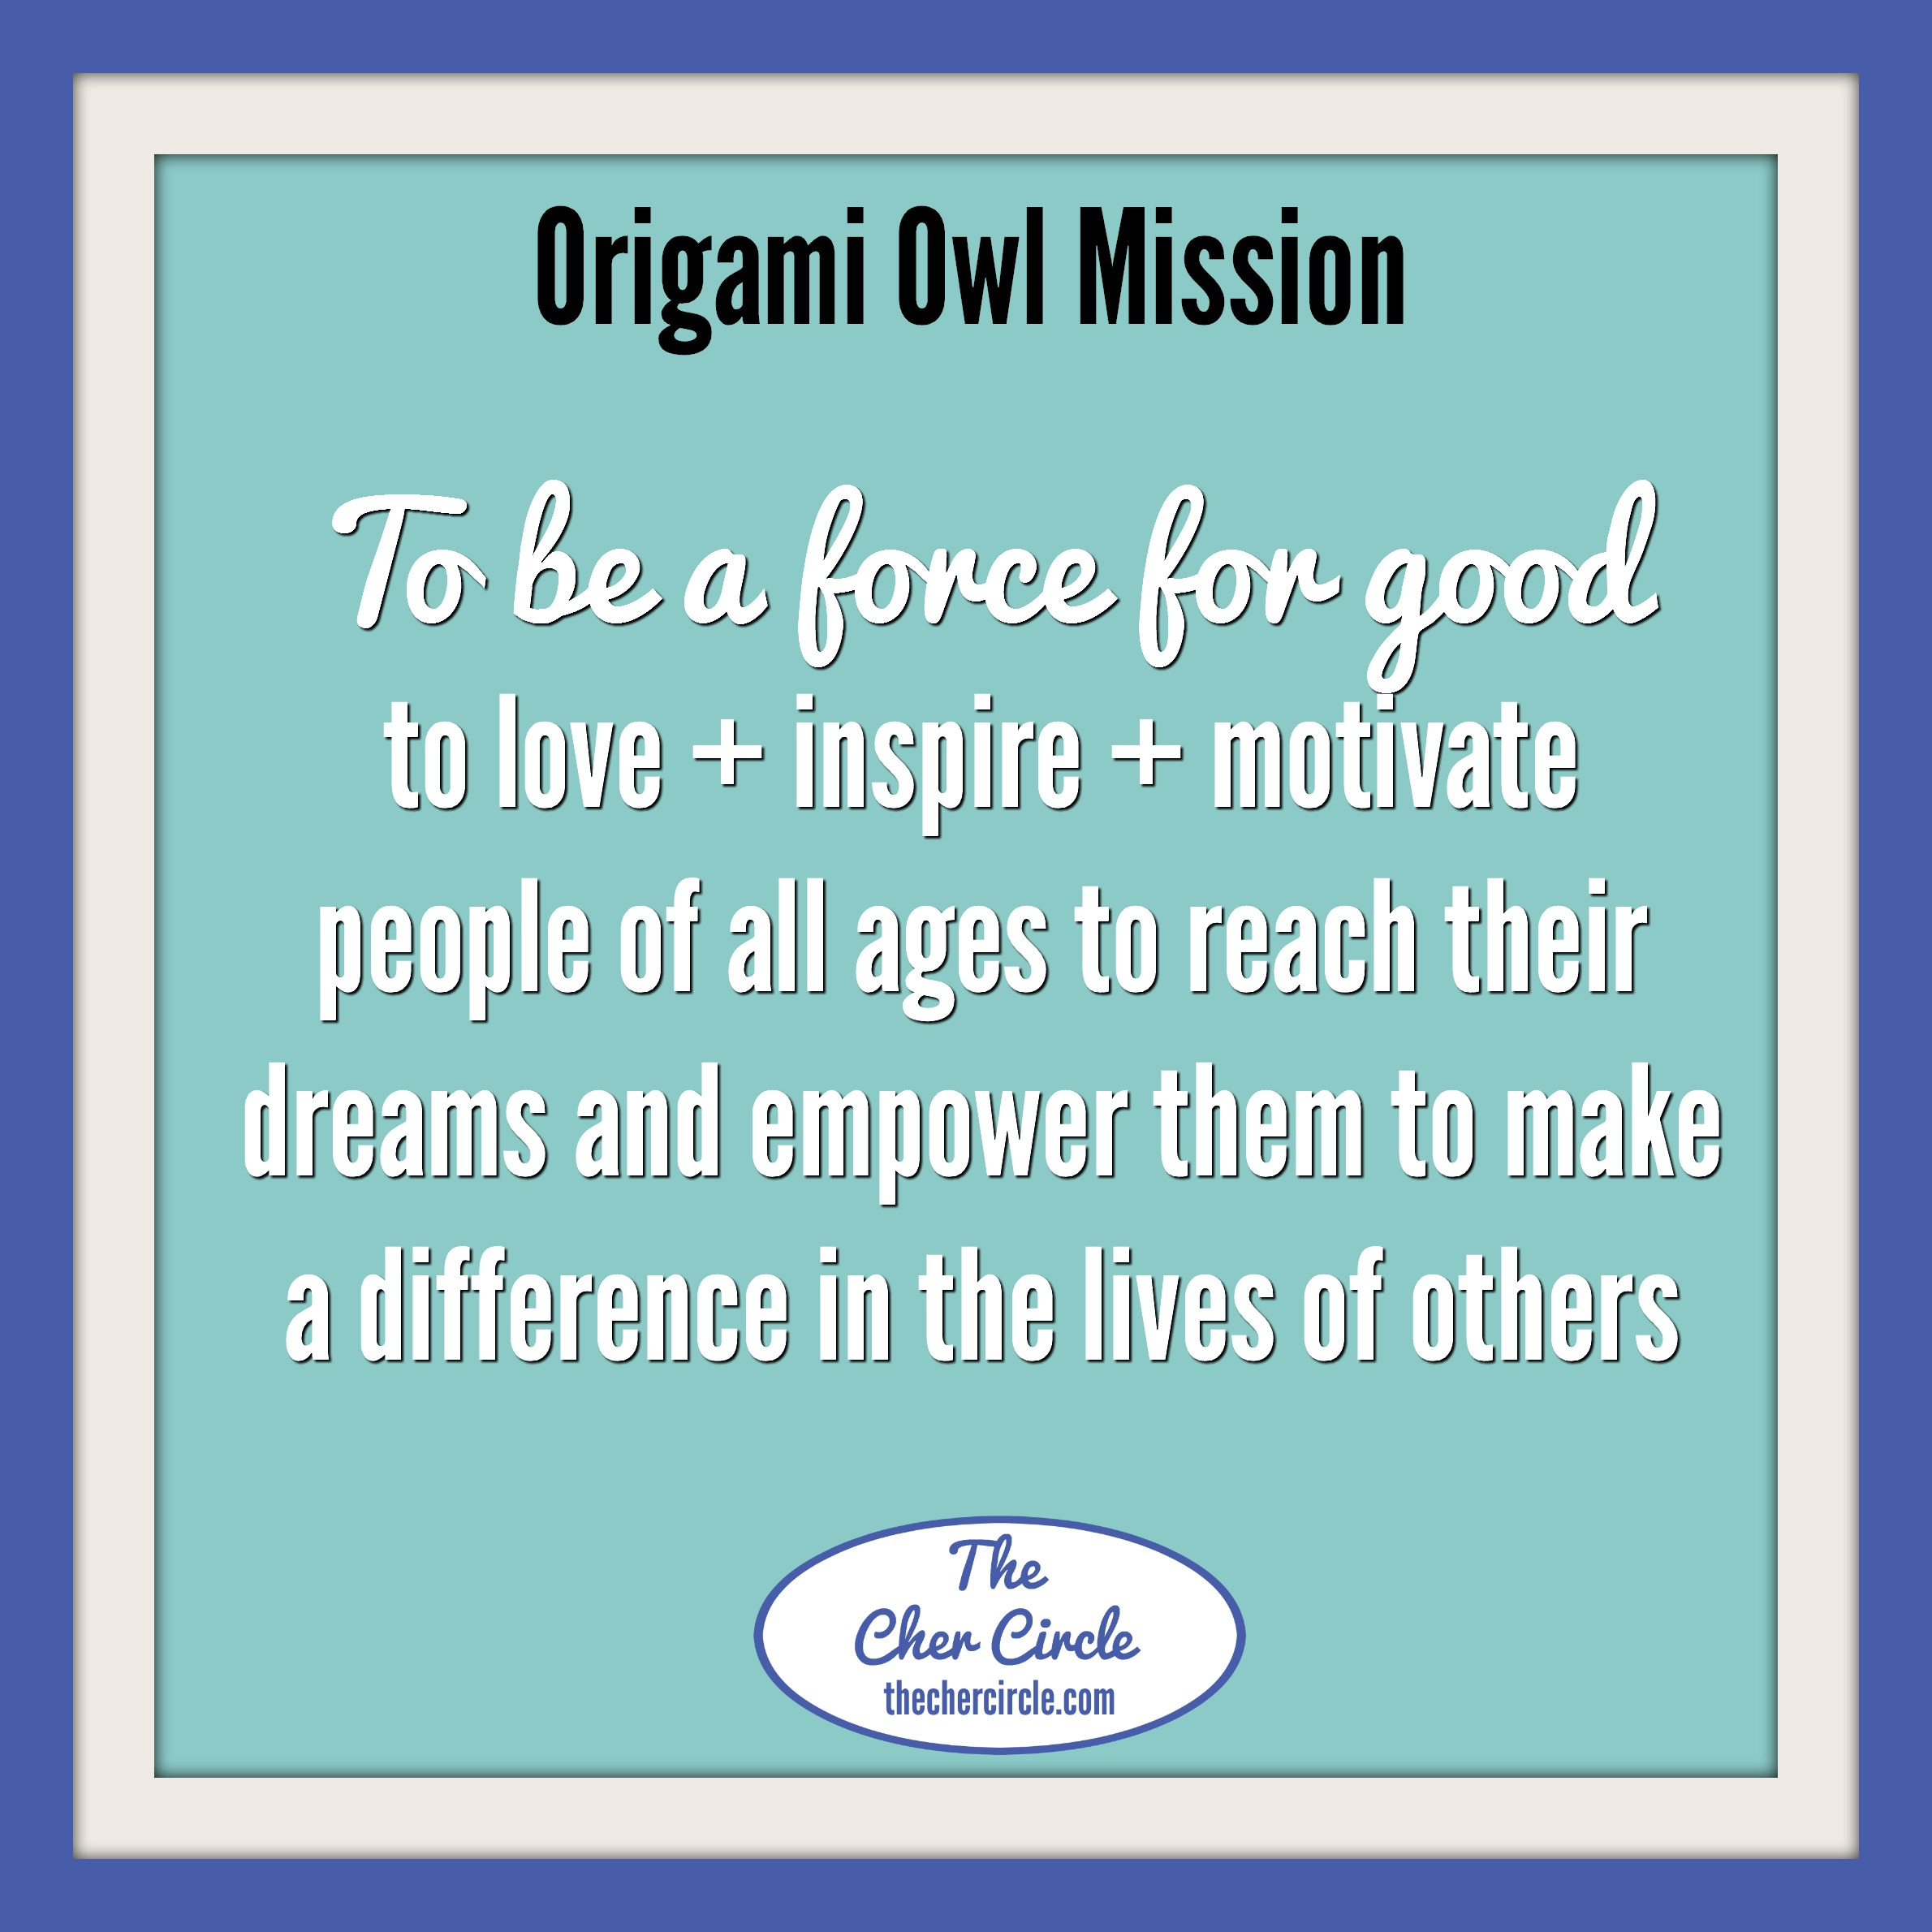 What Is Origami Owl Origami Owl Mission What Could It Mean To You Direct Sales And